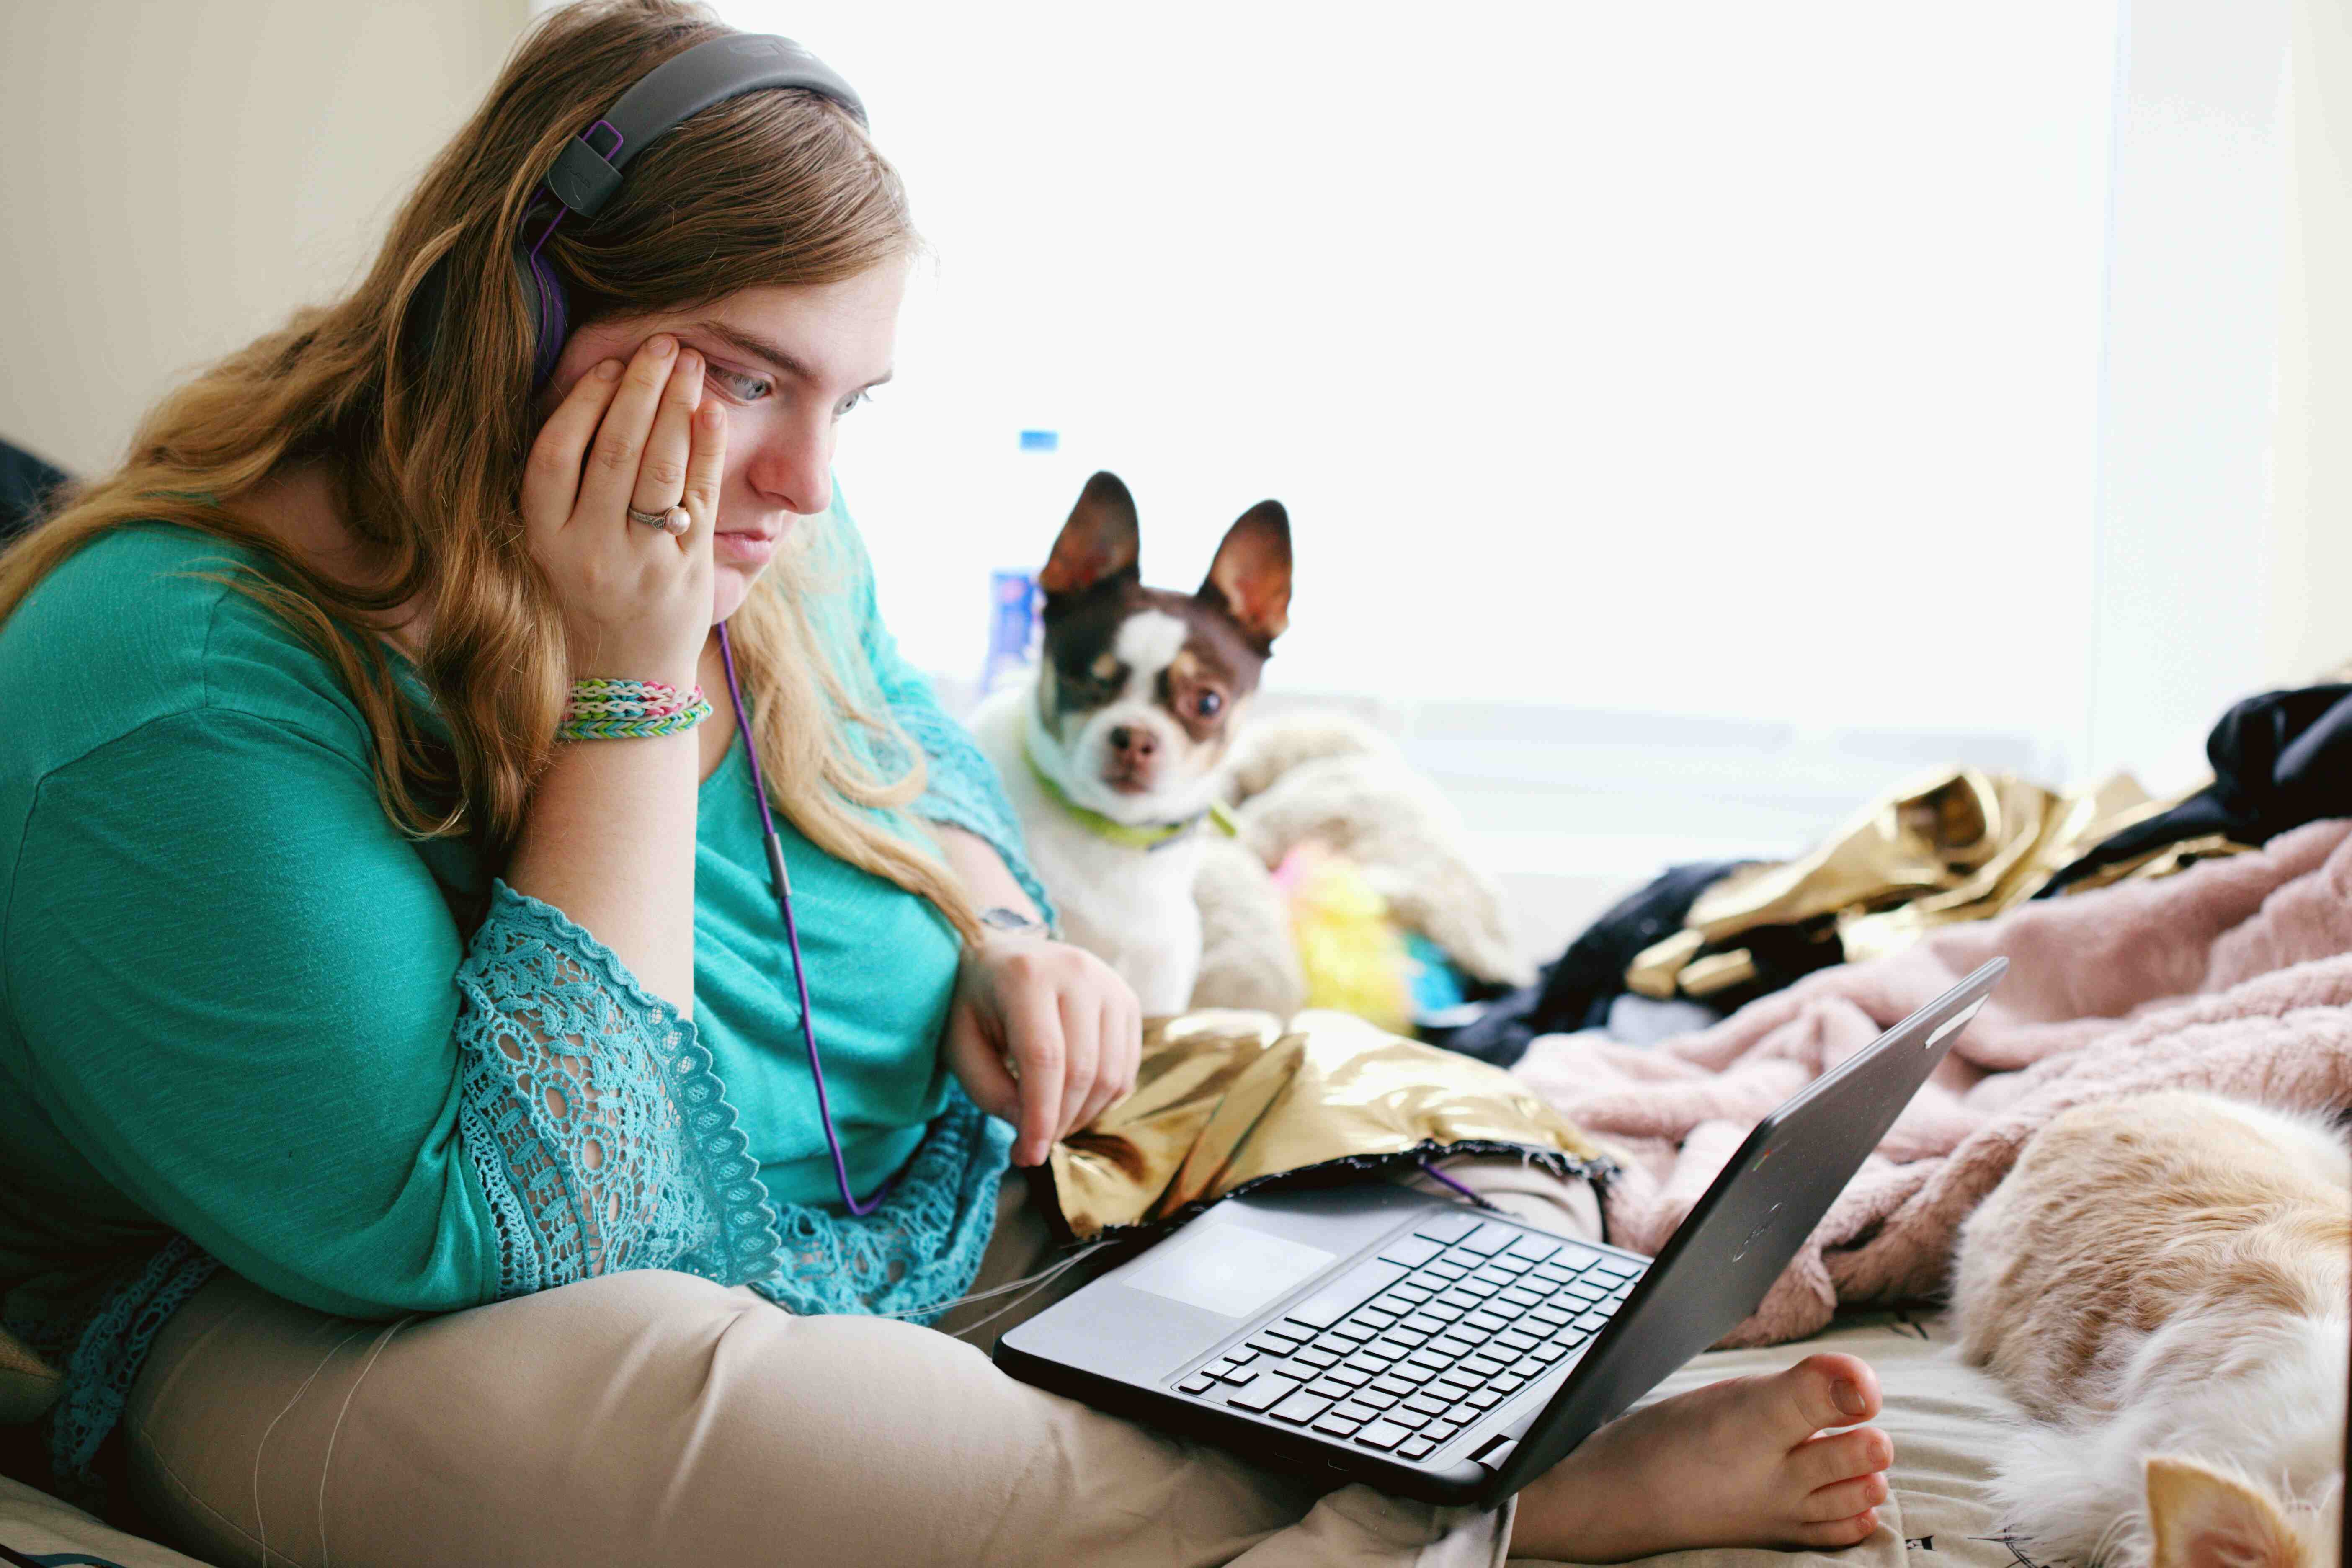 a healthy women finding social support online to over come high-functioning anxiety on a laptop with a puppy in the backgroud